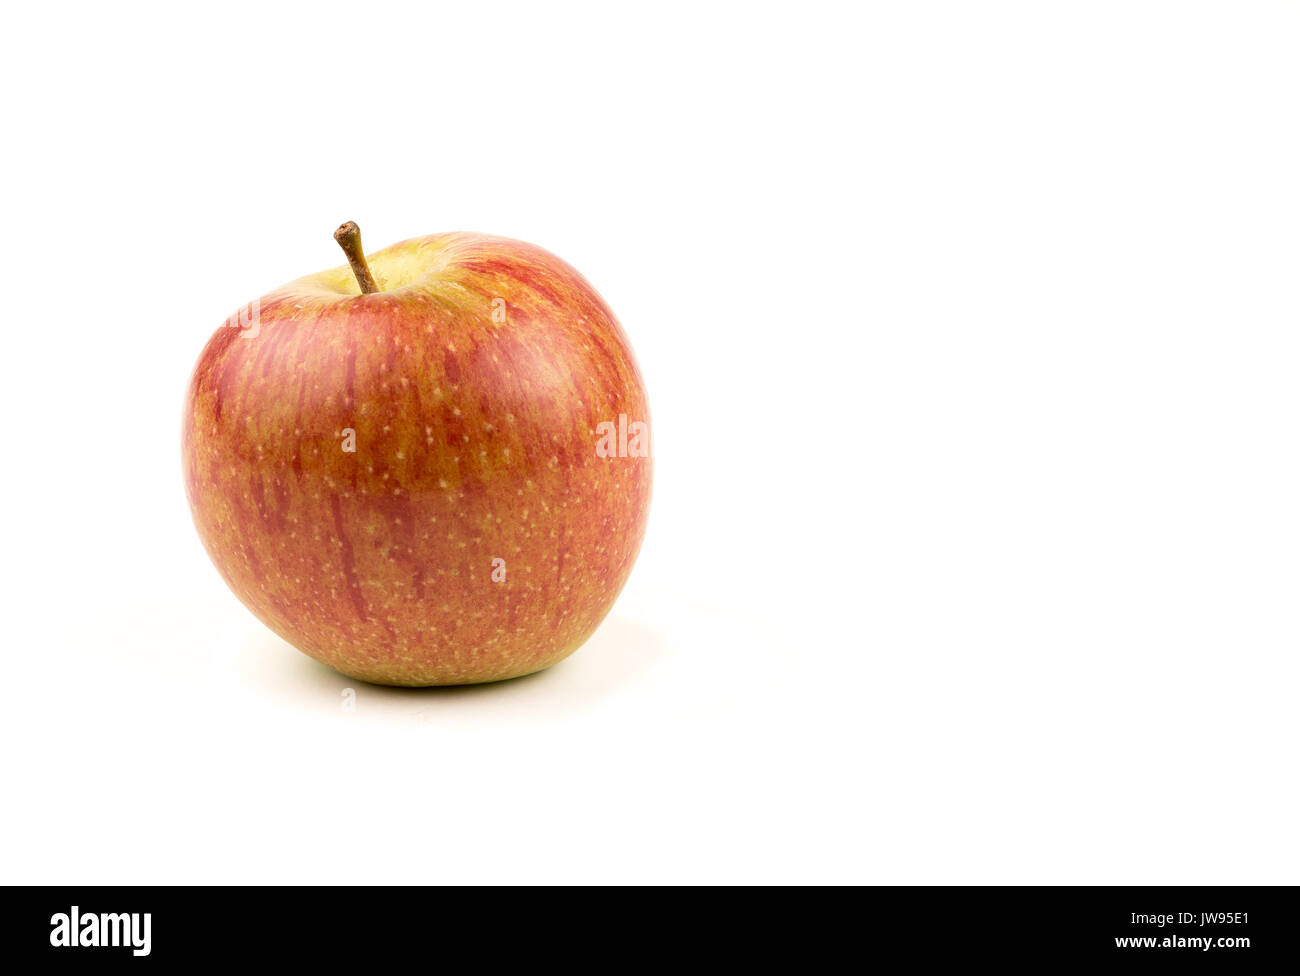 Red apple on a white background Stock Photo